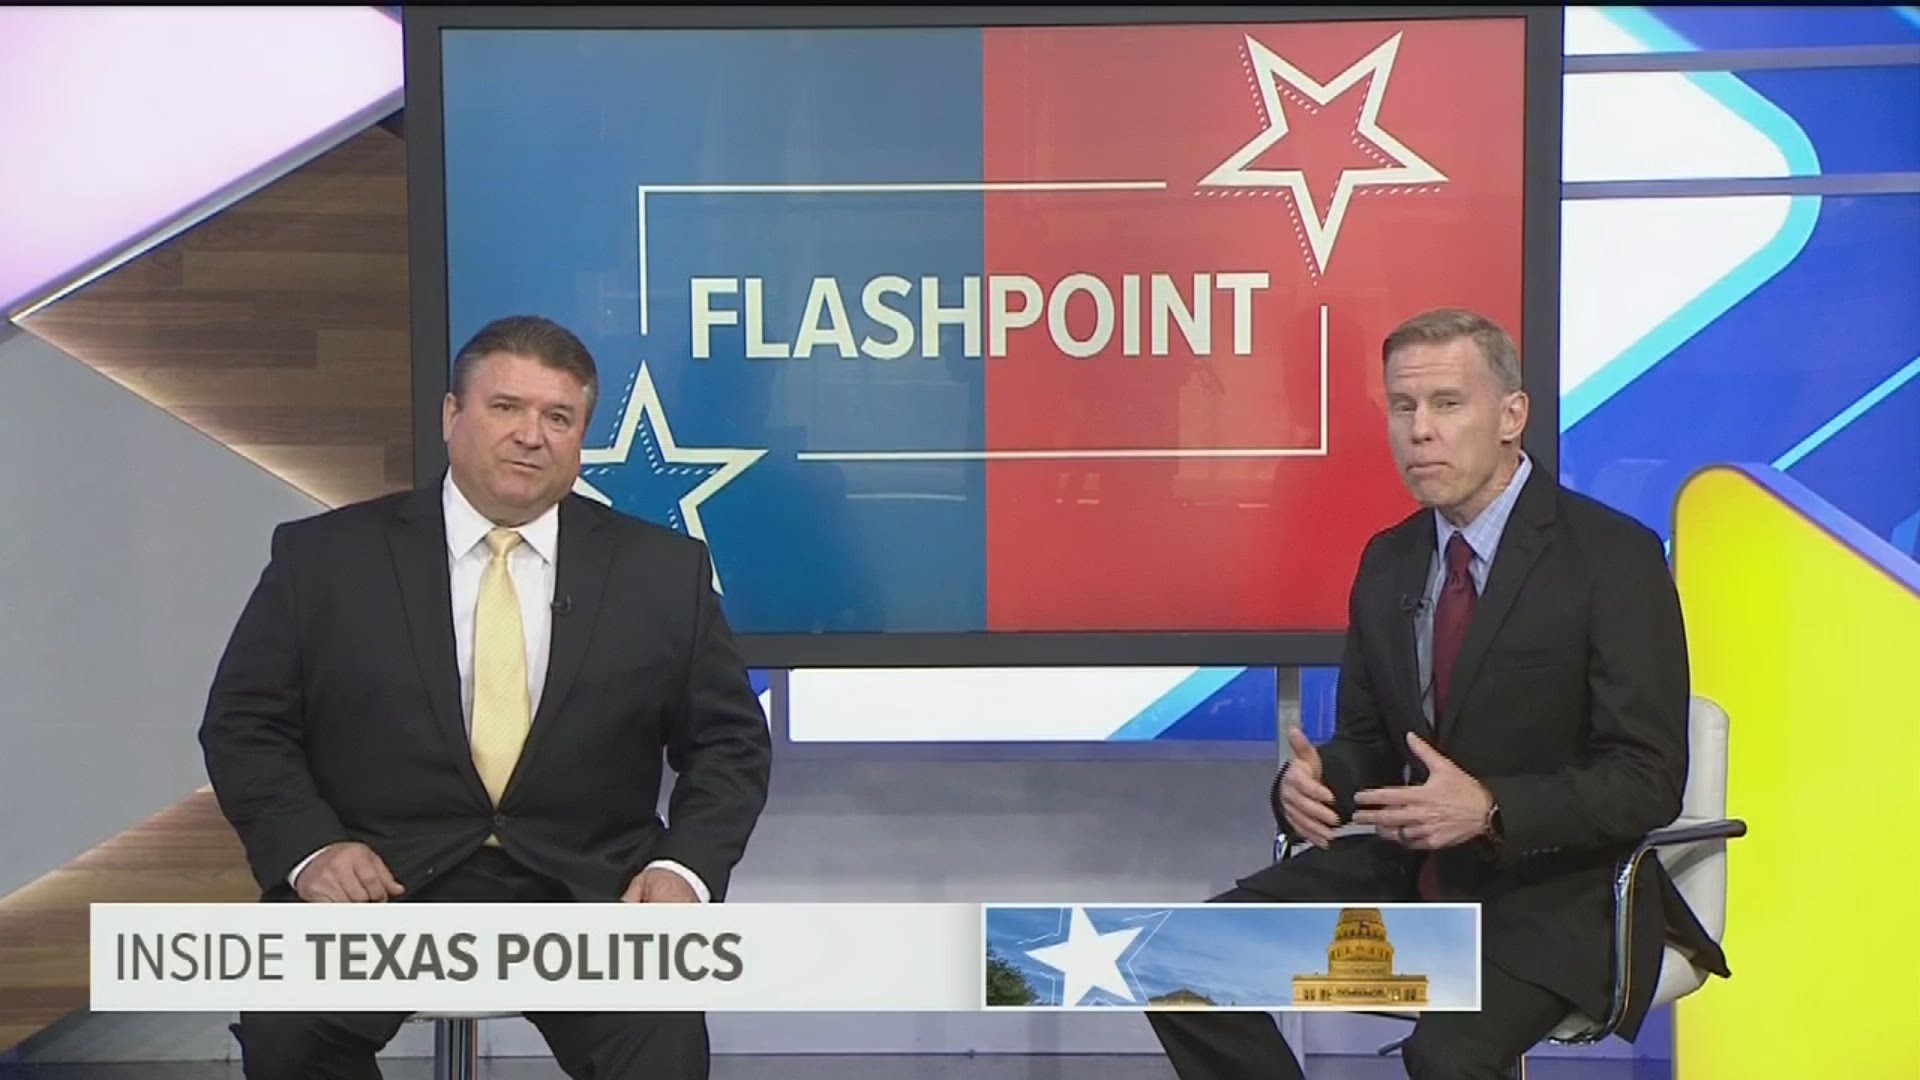 President Donald Trump signed an executive order on Thursday that threatened to withhold federal funds from universities if free speech isn't allowed. Flashpoint debates whether this is even an issue. From the right, Wade Emmert, Dallas County's former GOP chair. And from the left, Rich Hancock of VirtualNewsCenter.com.